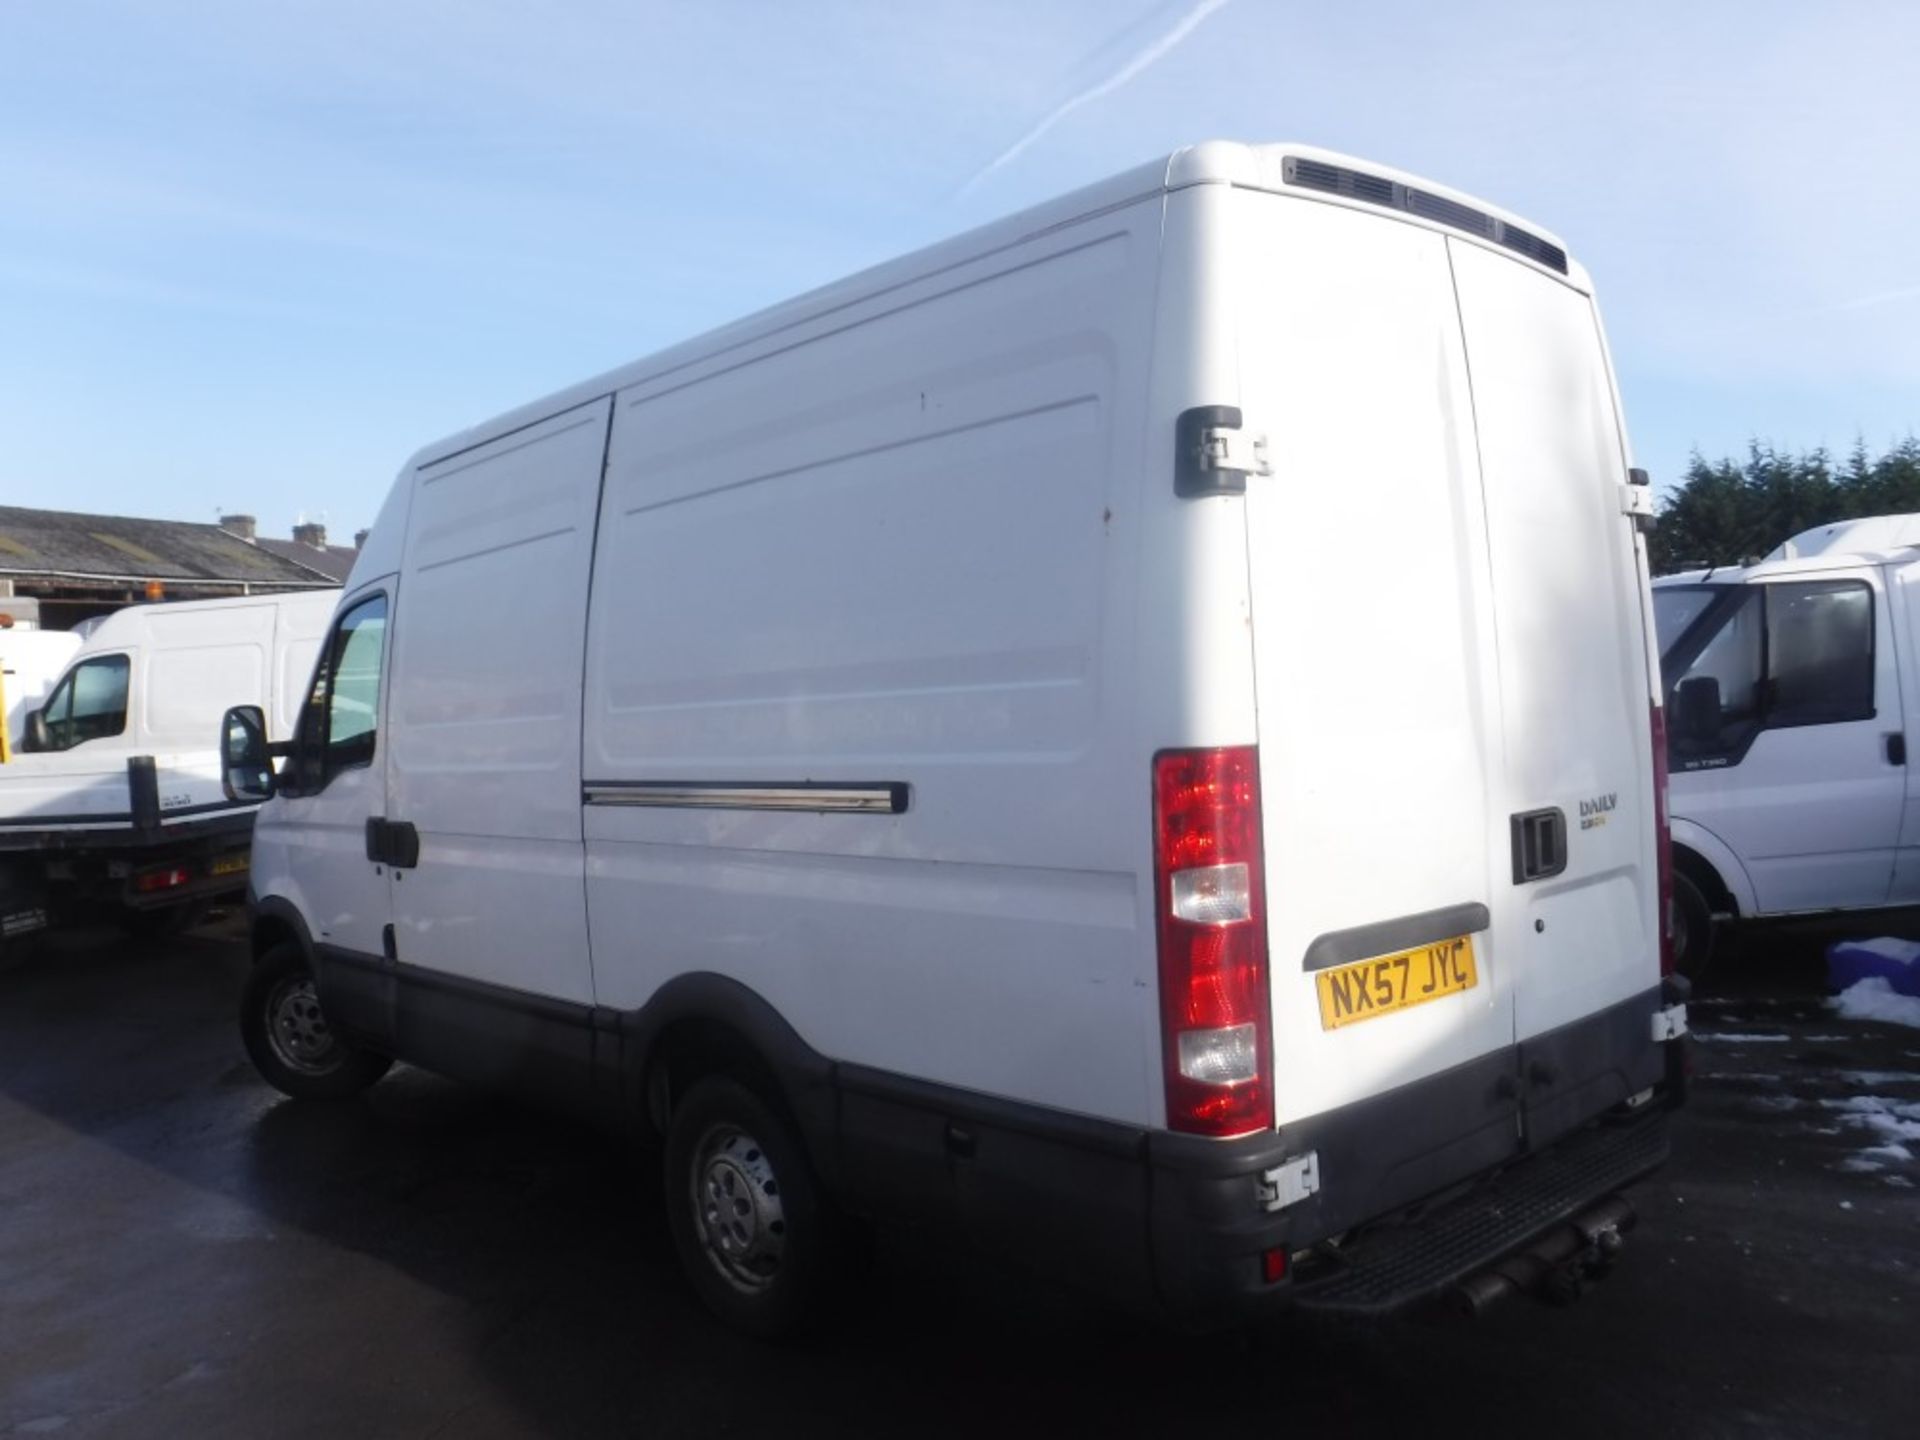 57 reg IVECO DAILY 35S12 MWB, 1ST REG 01/08, TEST 07/19, 91345M NOT WARRANTED, V5 HERE, 2 FORMER - Image 3 of 6